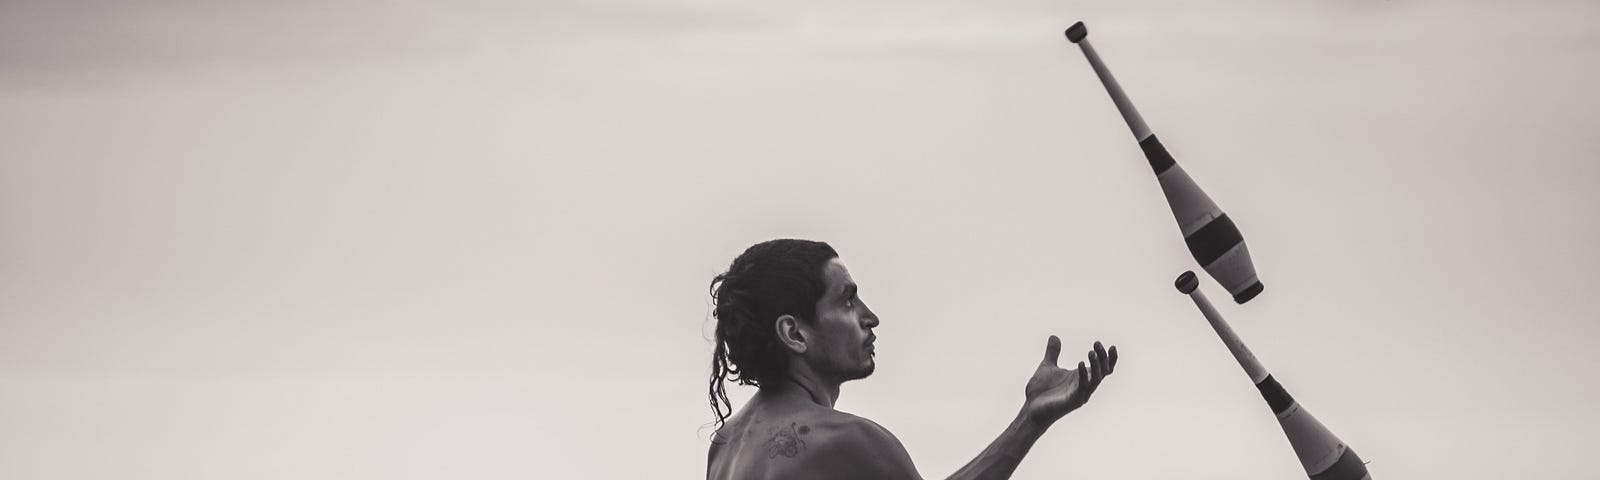 A black and white photo of a man juggling pins on a beach.